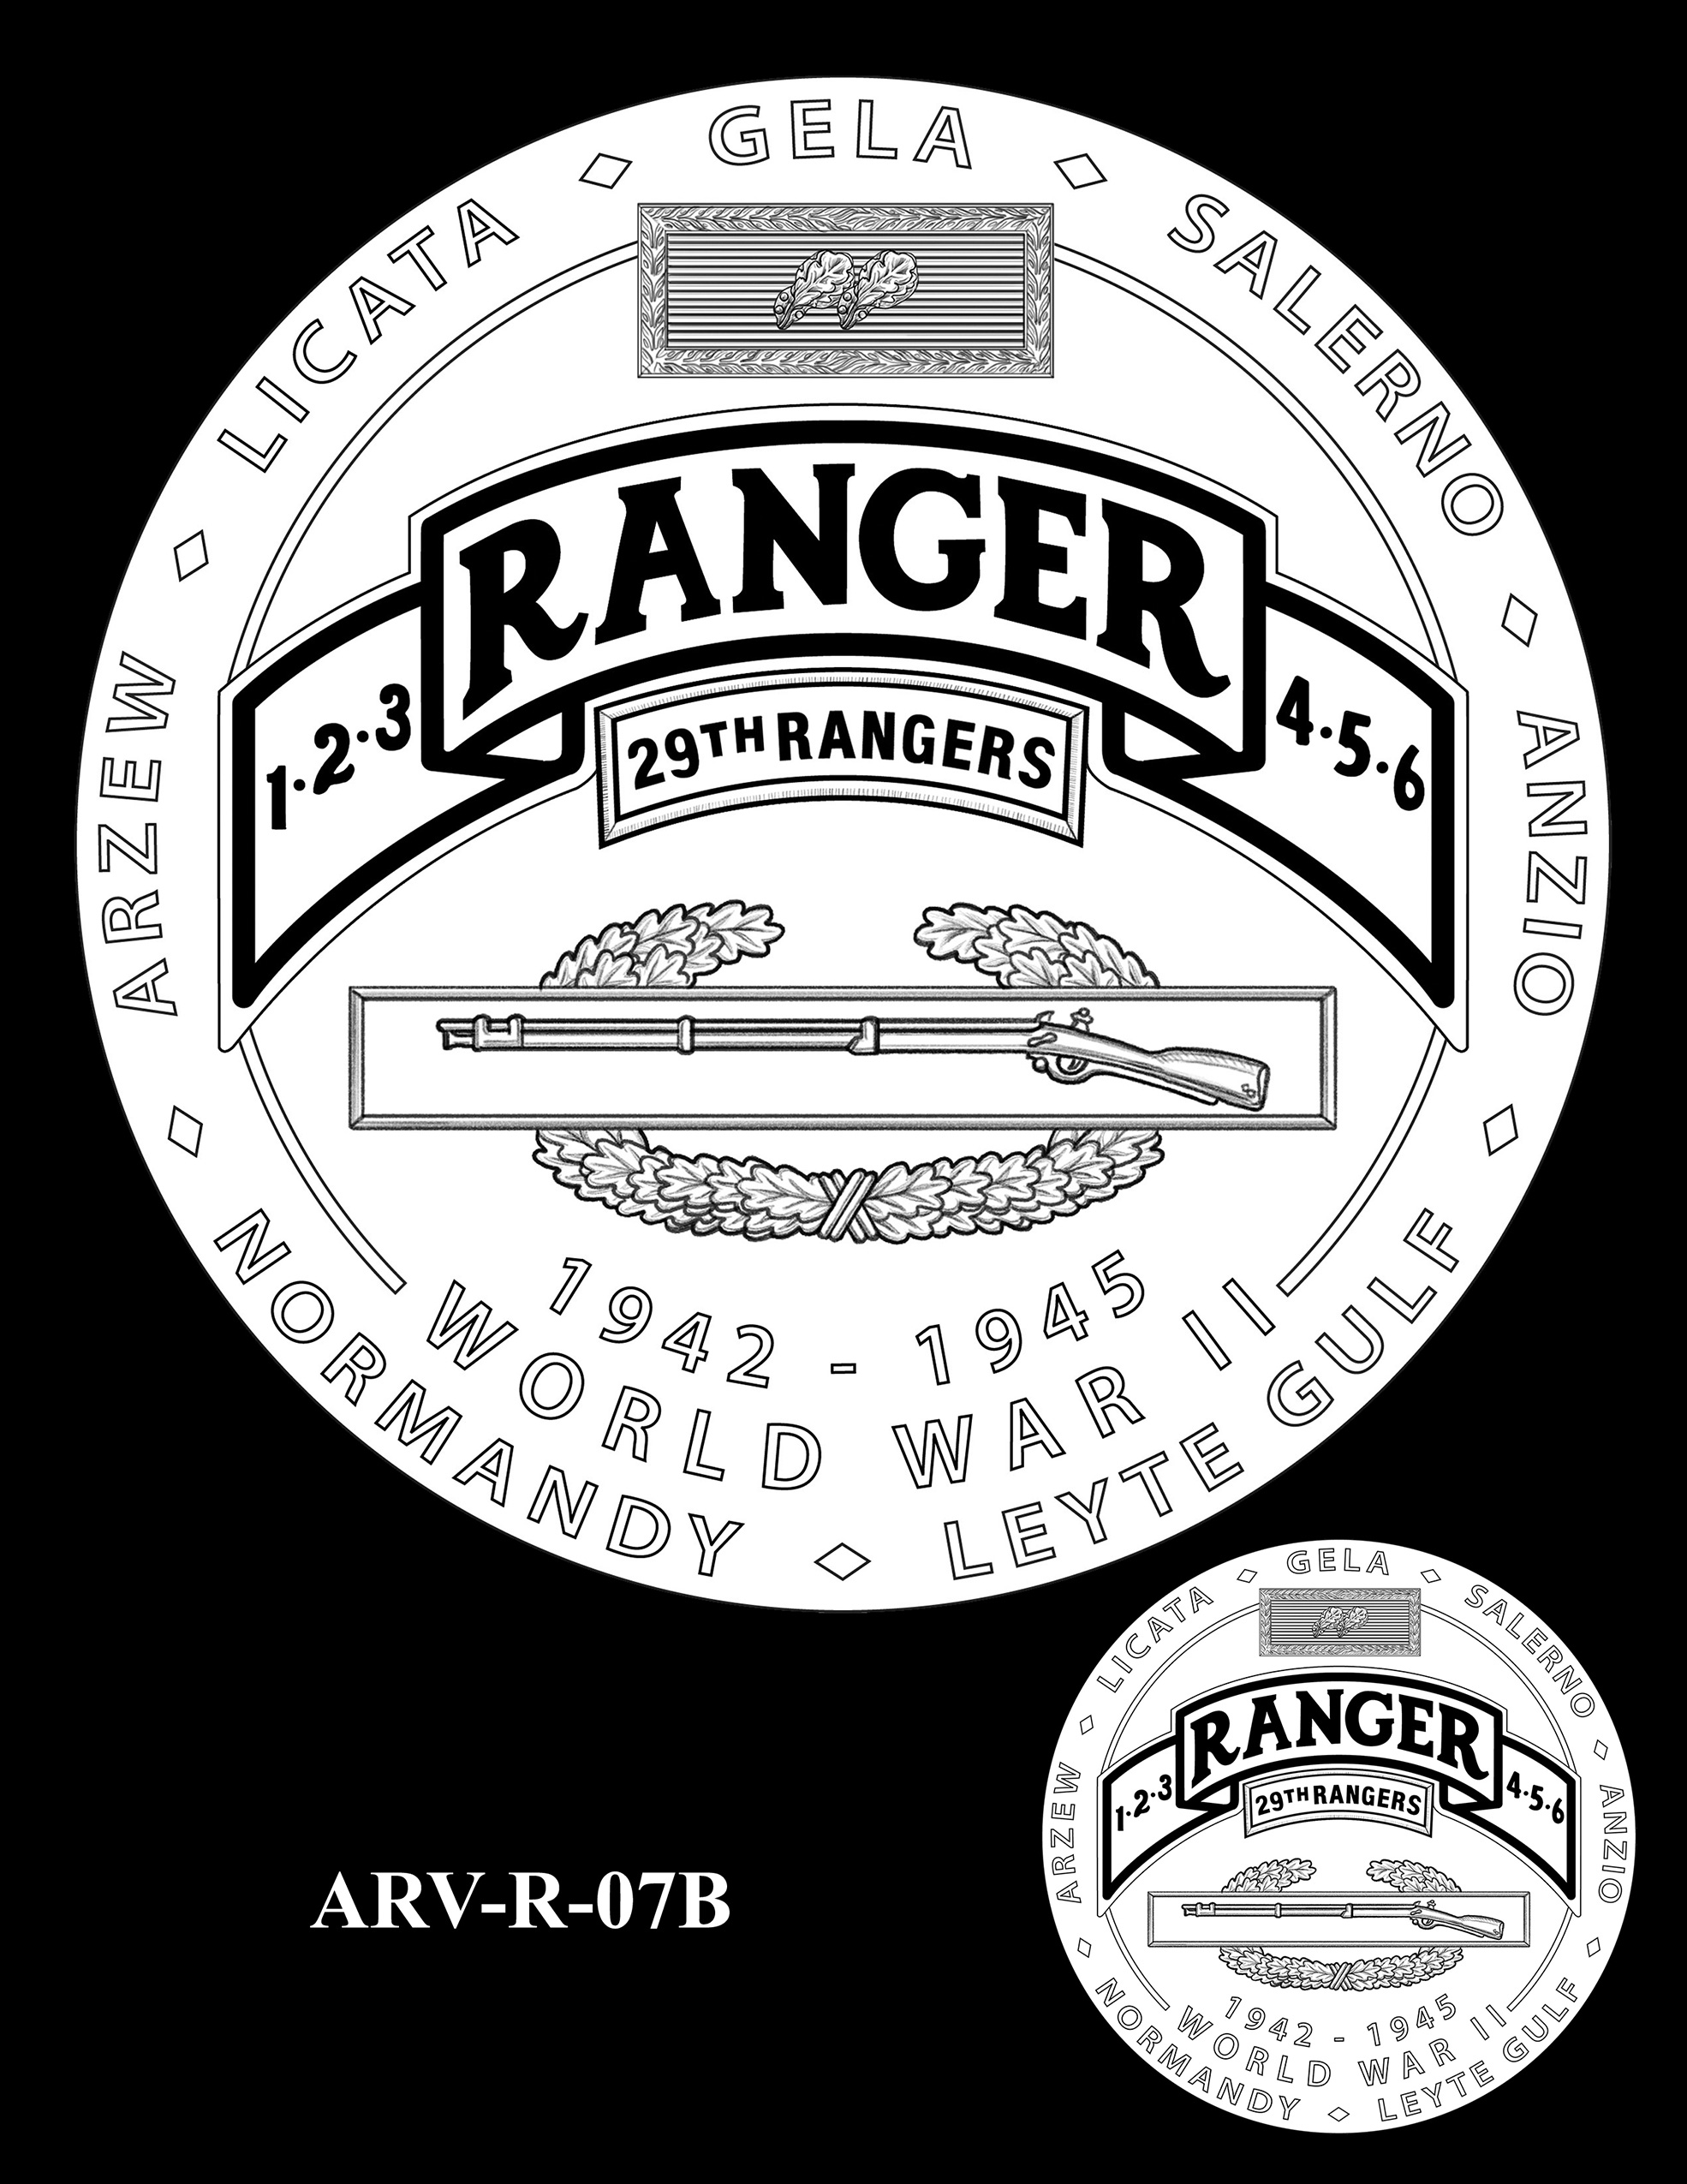 ARV-R-07B -- Army Ranger Veterans of WWII Congressional Gold Medal